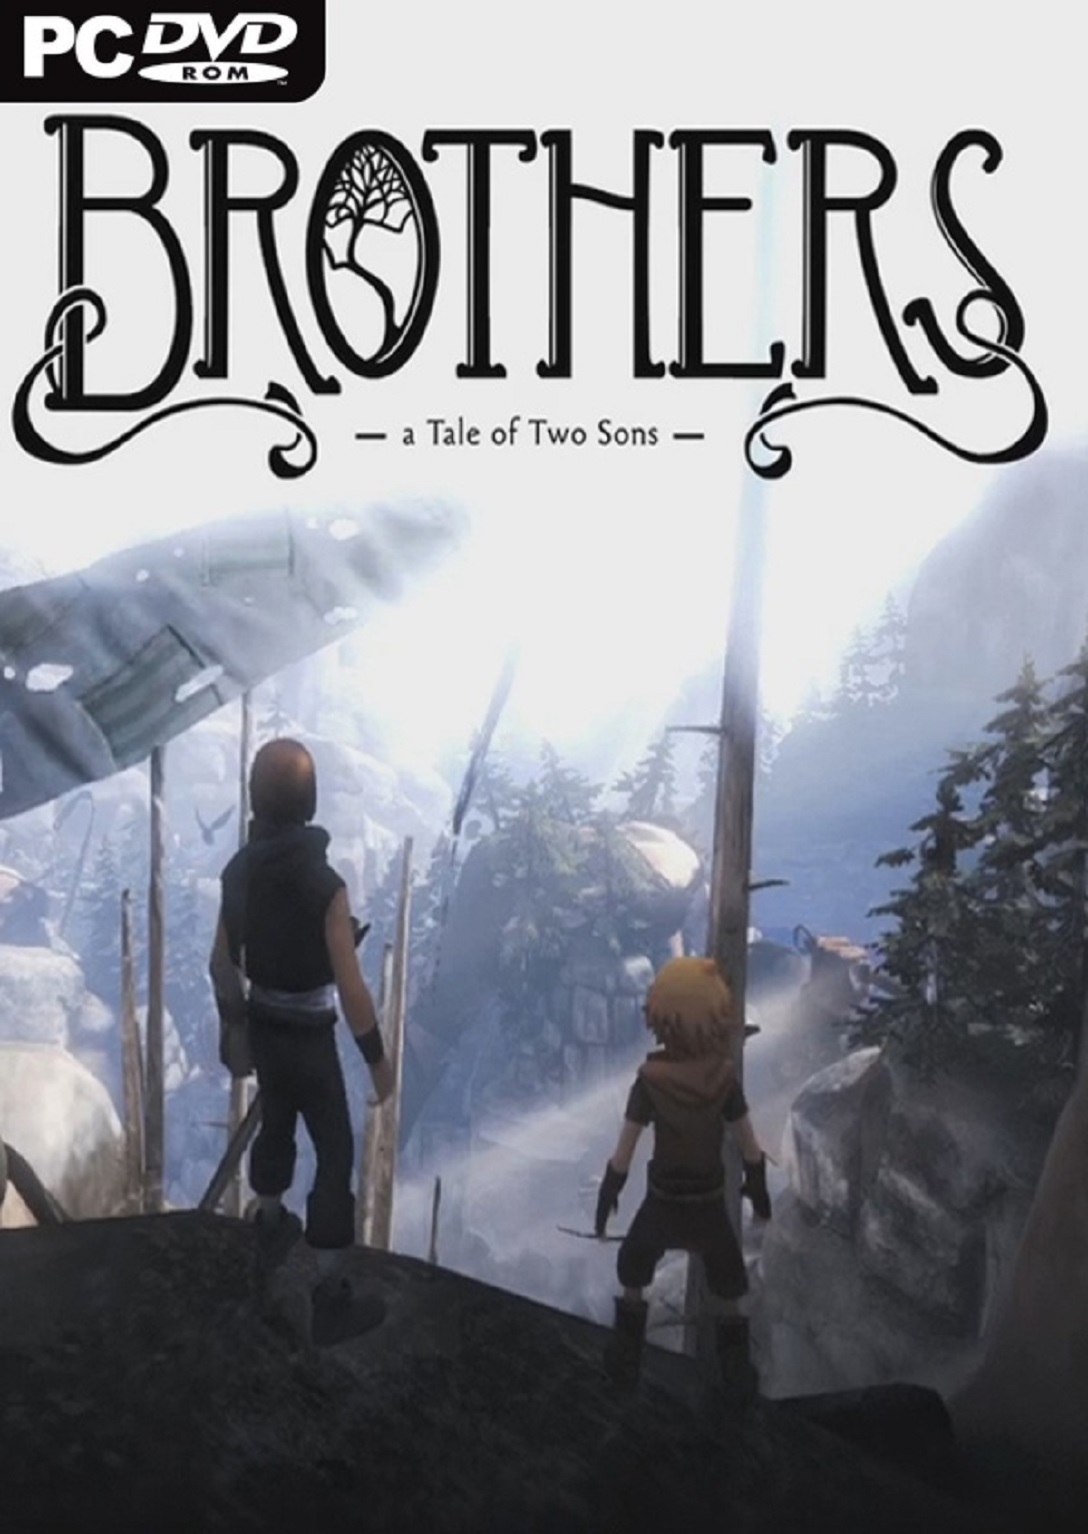 download brothers a tale of two sons metacritic for free